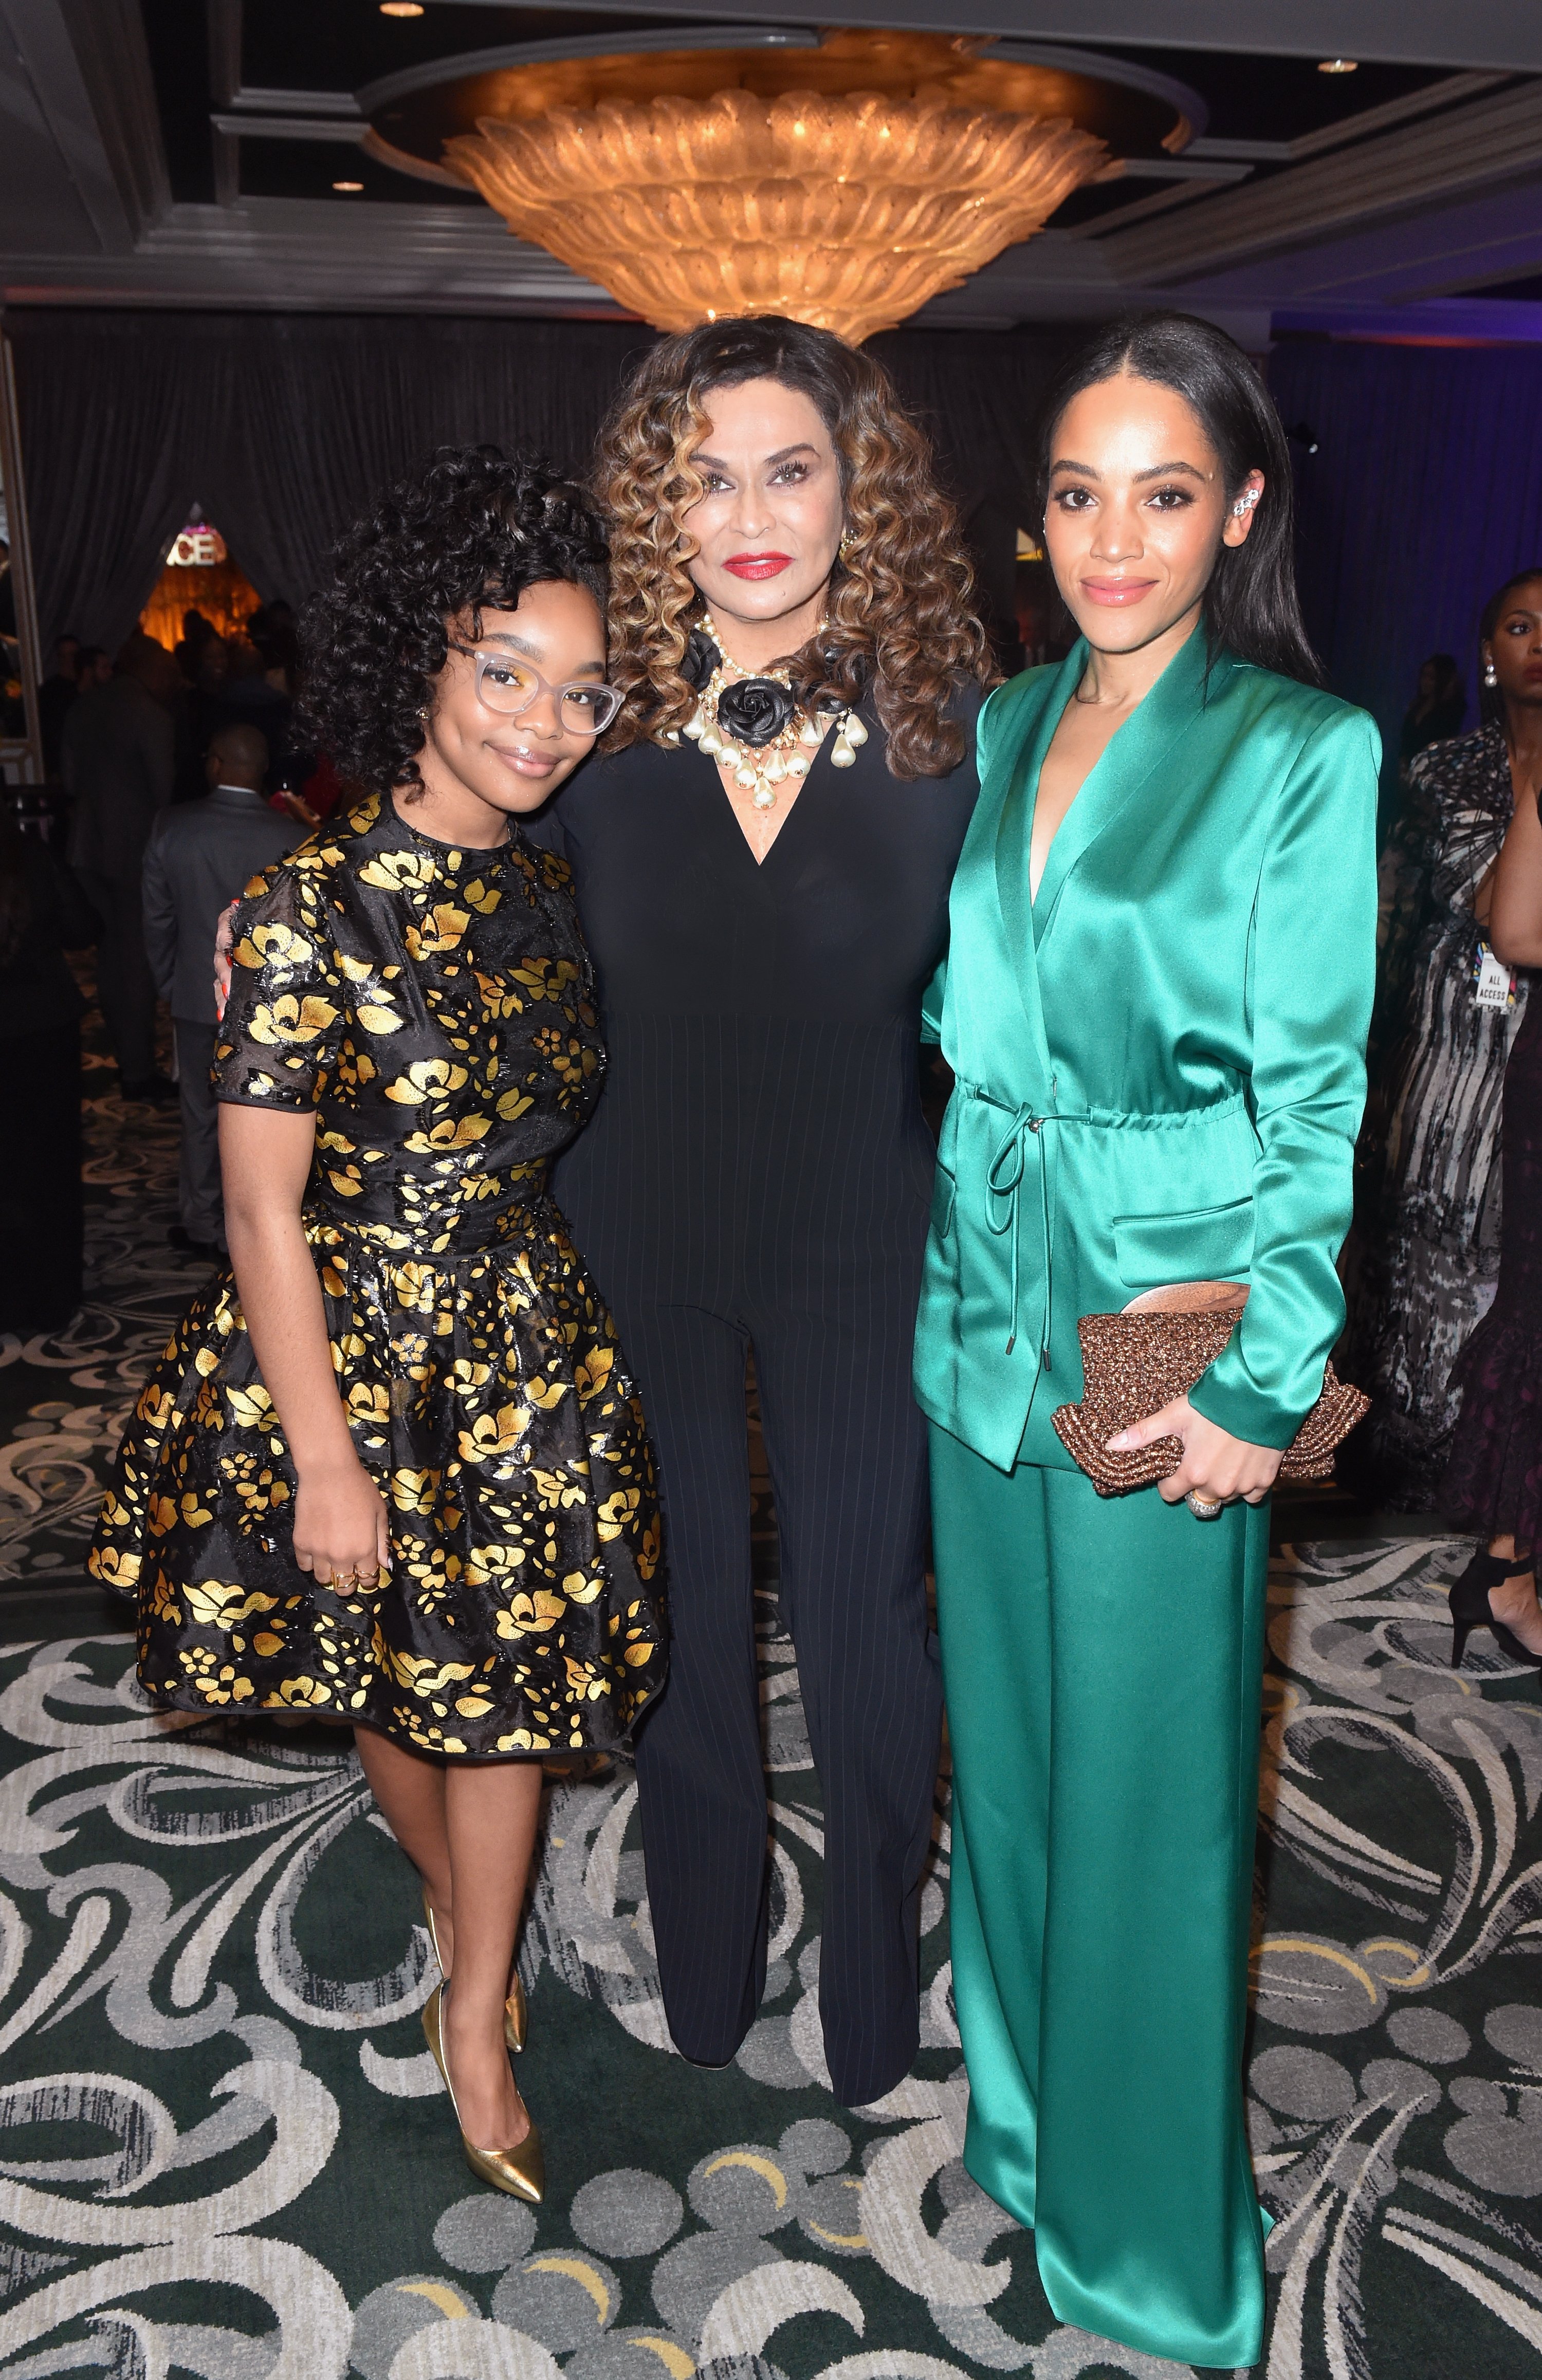 Marsai Martin, Tina Knowles Lawson, and Bevy Smith attend the 2019 Essence Black Women in Hollywood Awards Luncheon on February 21, 2019 in Los Angeles, California. | Source: Getty Images